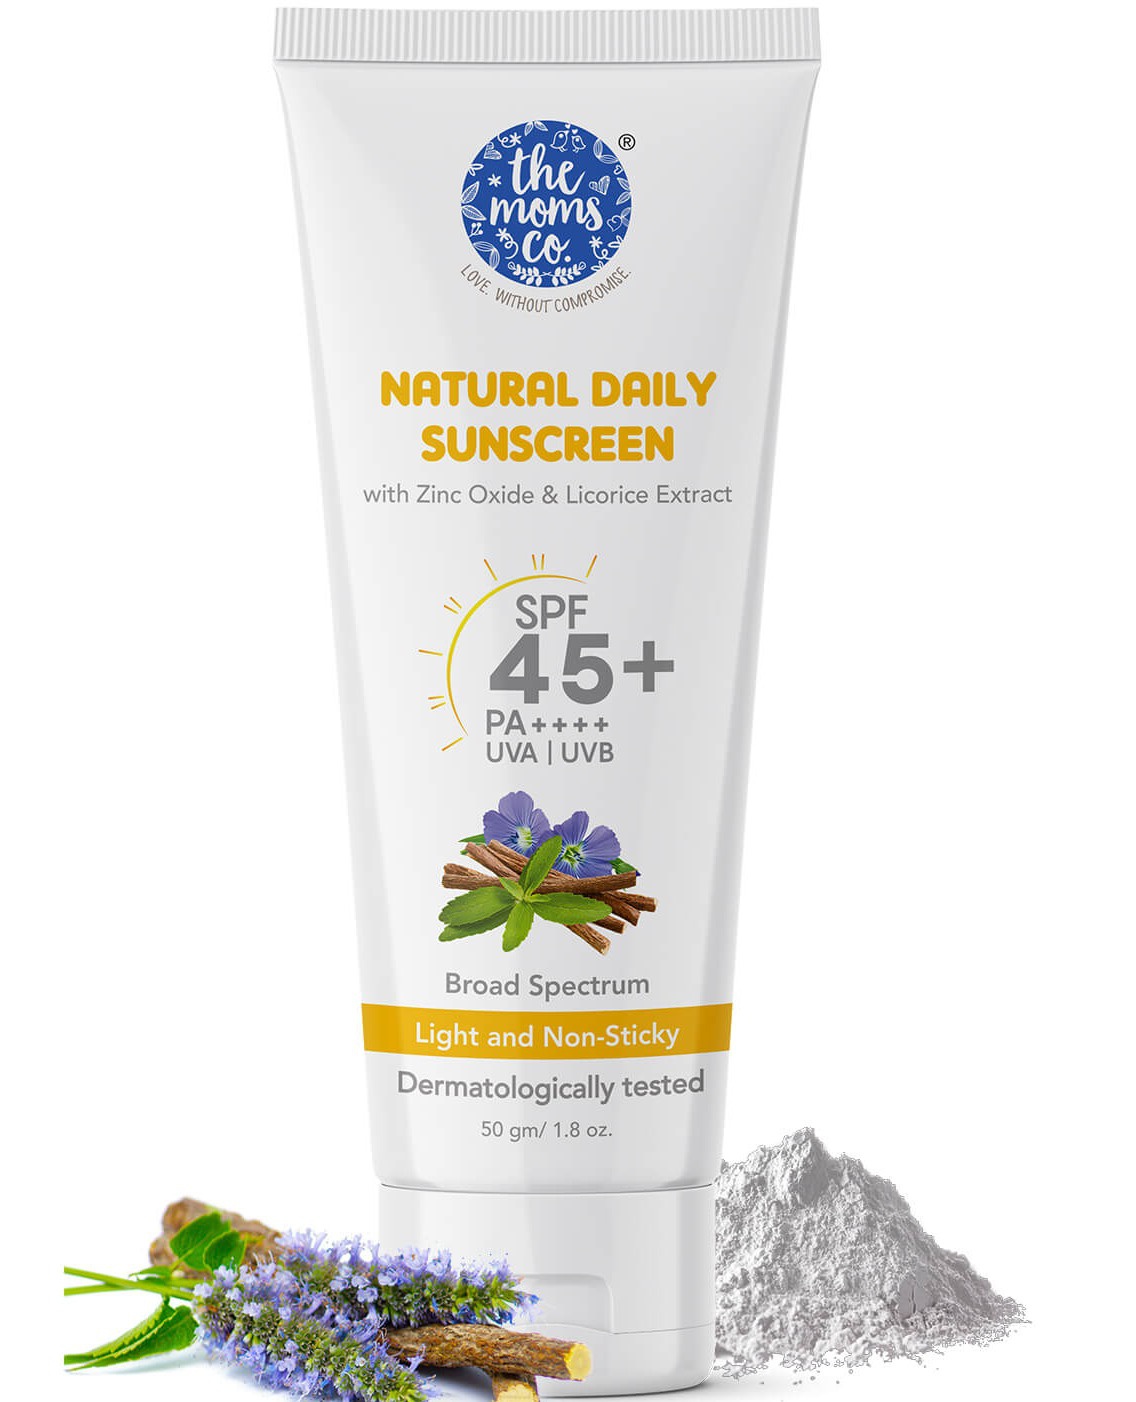 The Mom's Co. Natural Daily Mineral Sunscreen